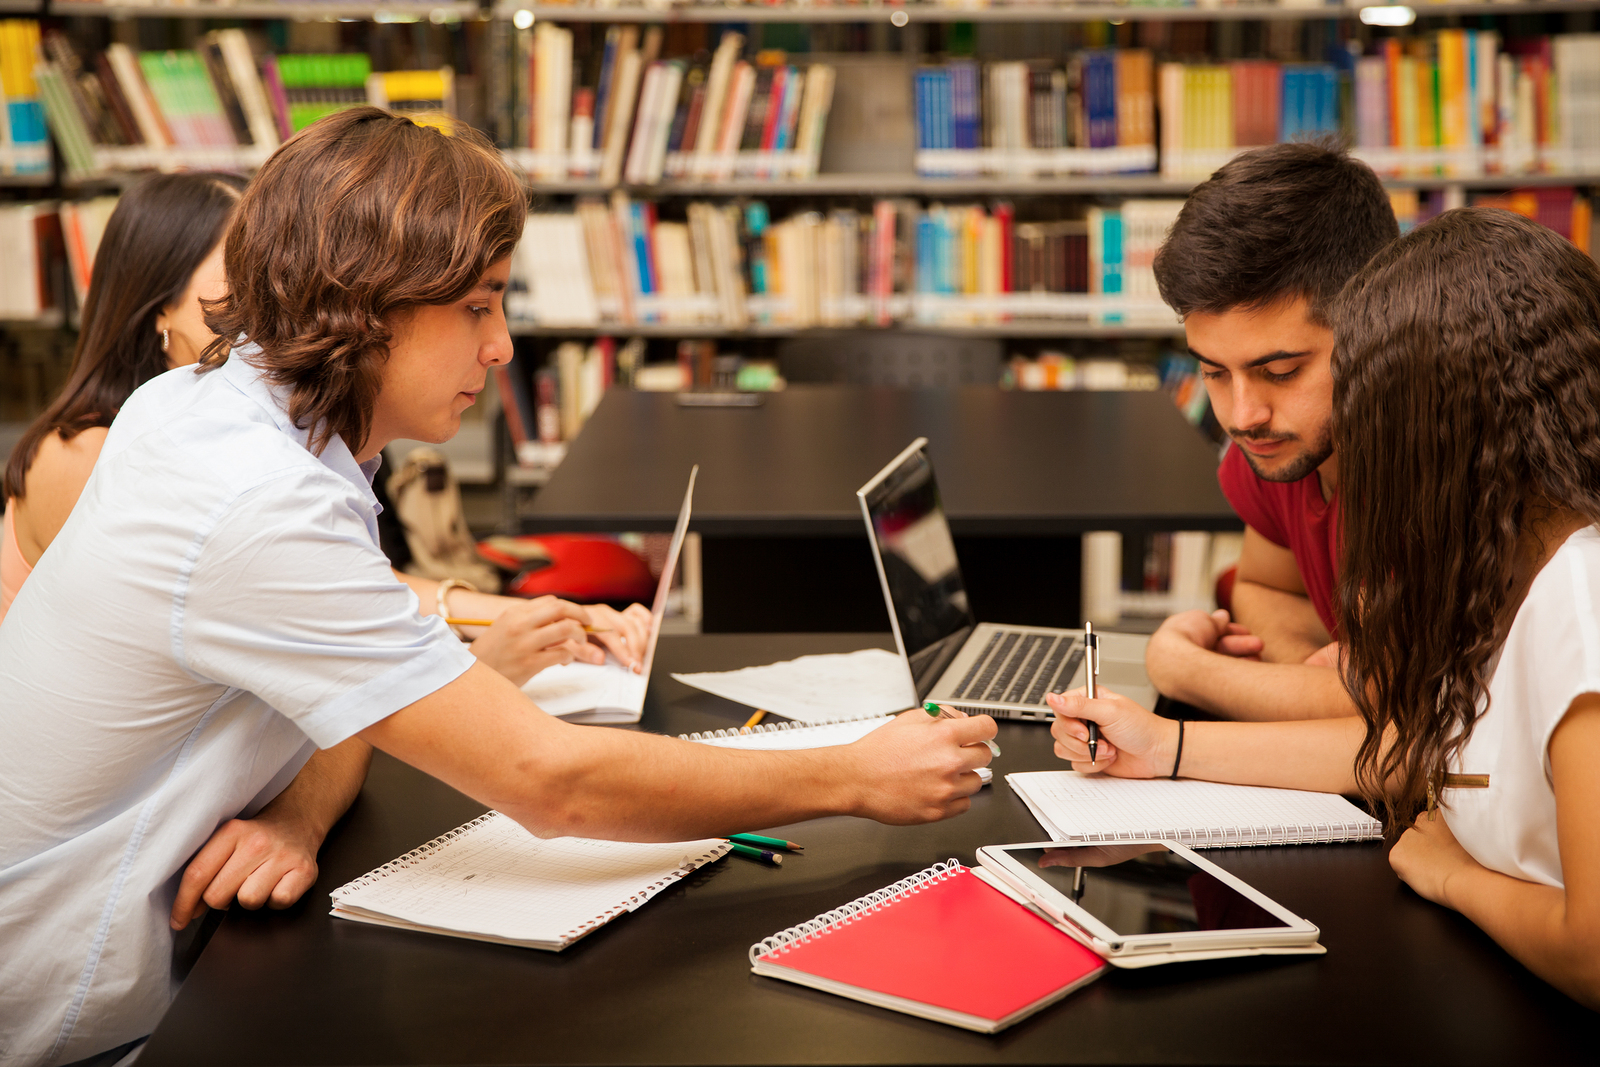 According to a study, open educational resources not only reduce the costs of pursuing a university degree, they also improve academic performance and lower dropout rates. - Image: Bigstockphoto